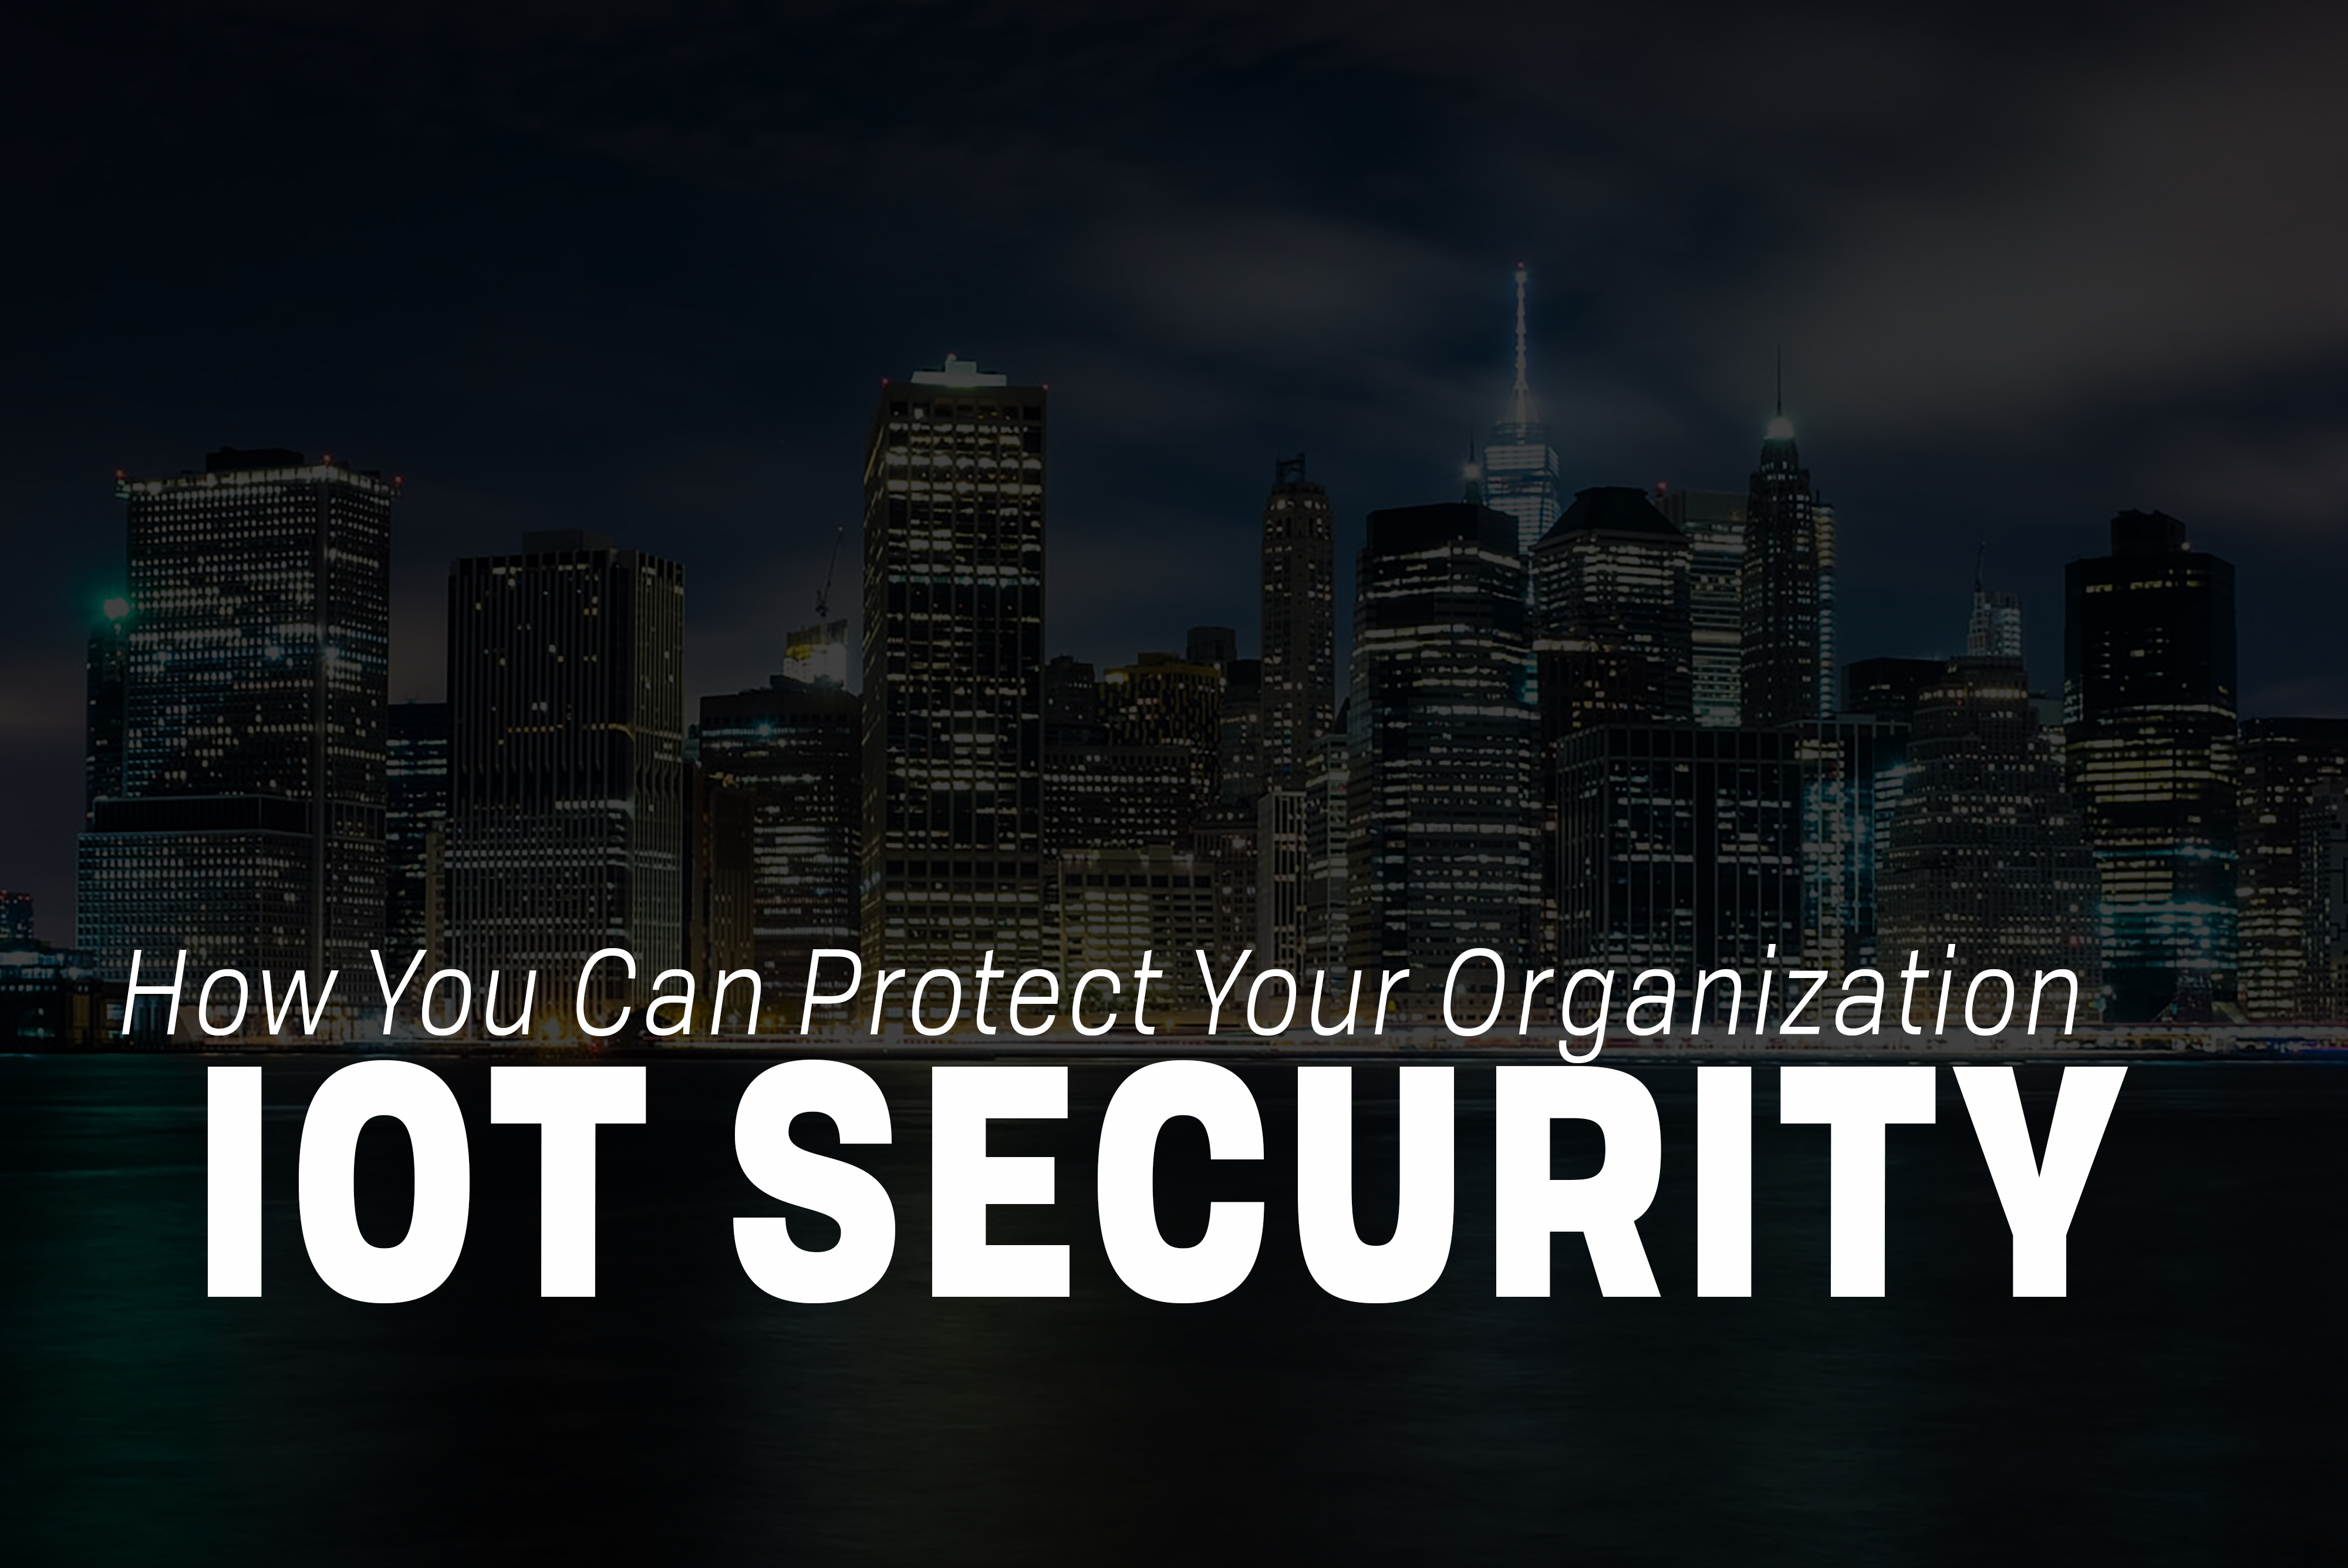 You are currently viewing IoT Security: How You Can Protect Your Organization